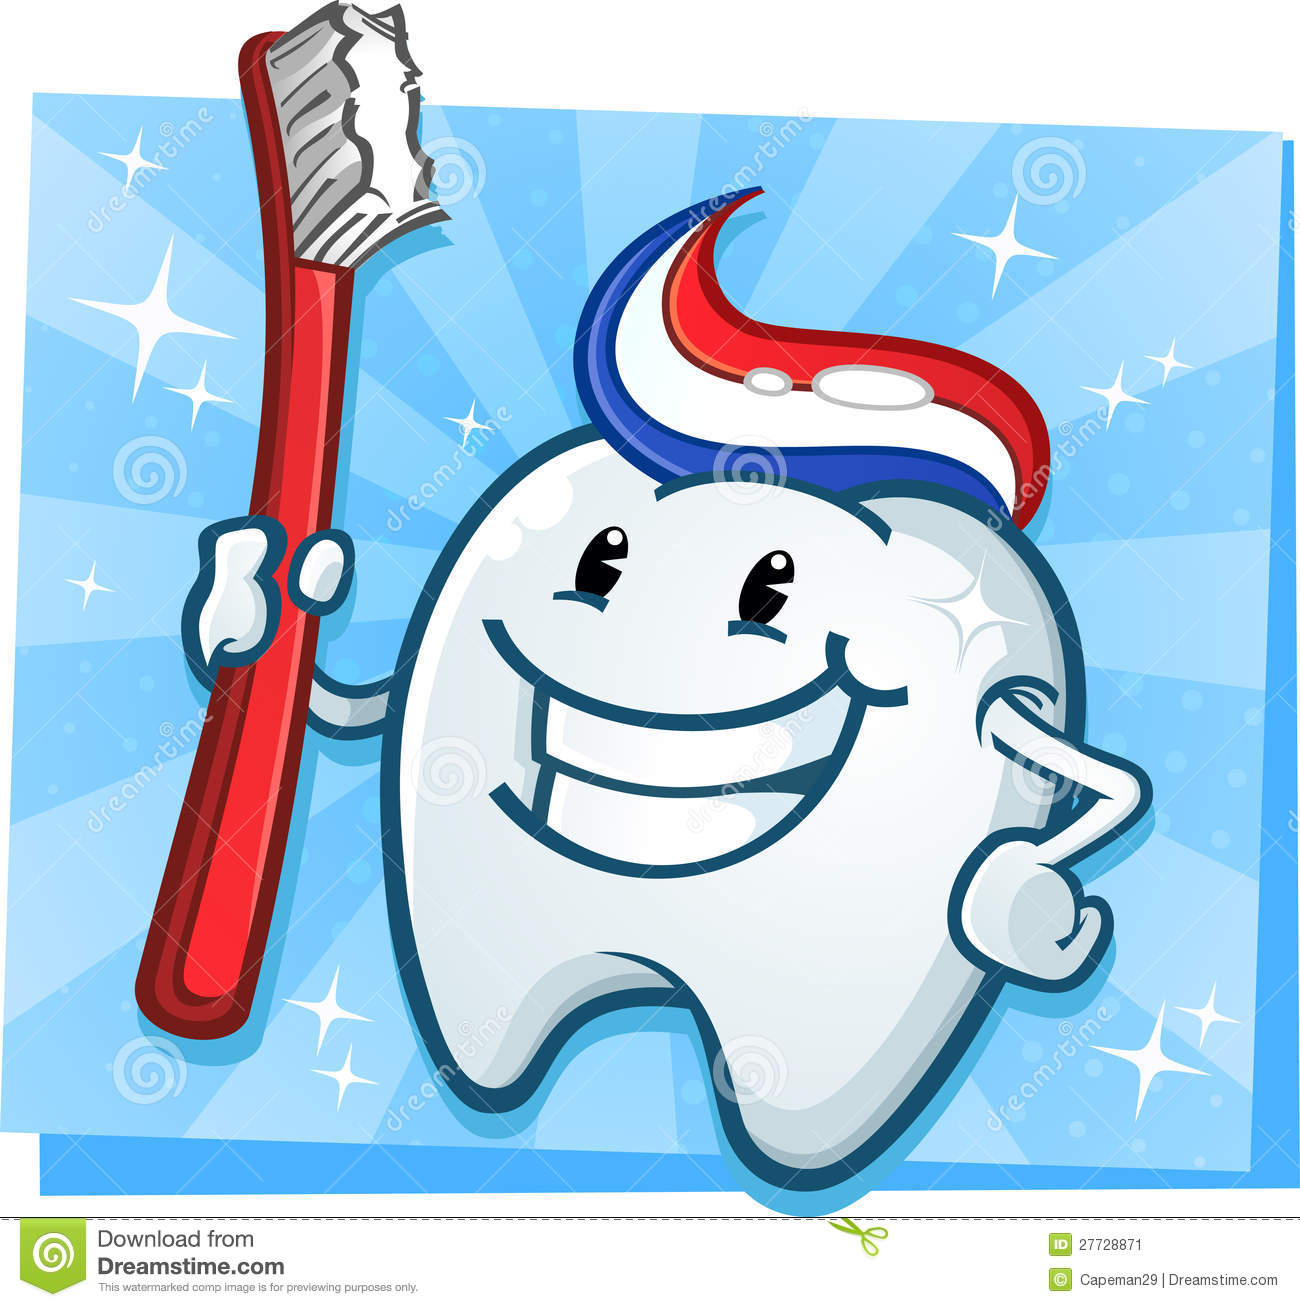 Cheerful Shiny Tooth Character  Holding His Toothbrush Victoriously